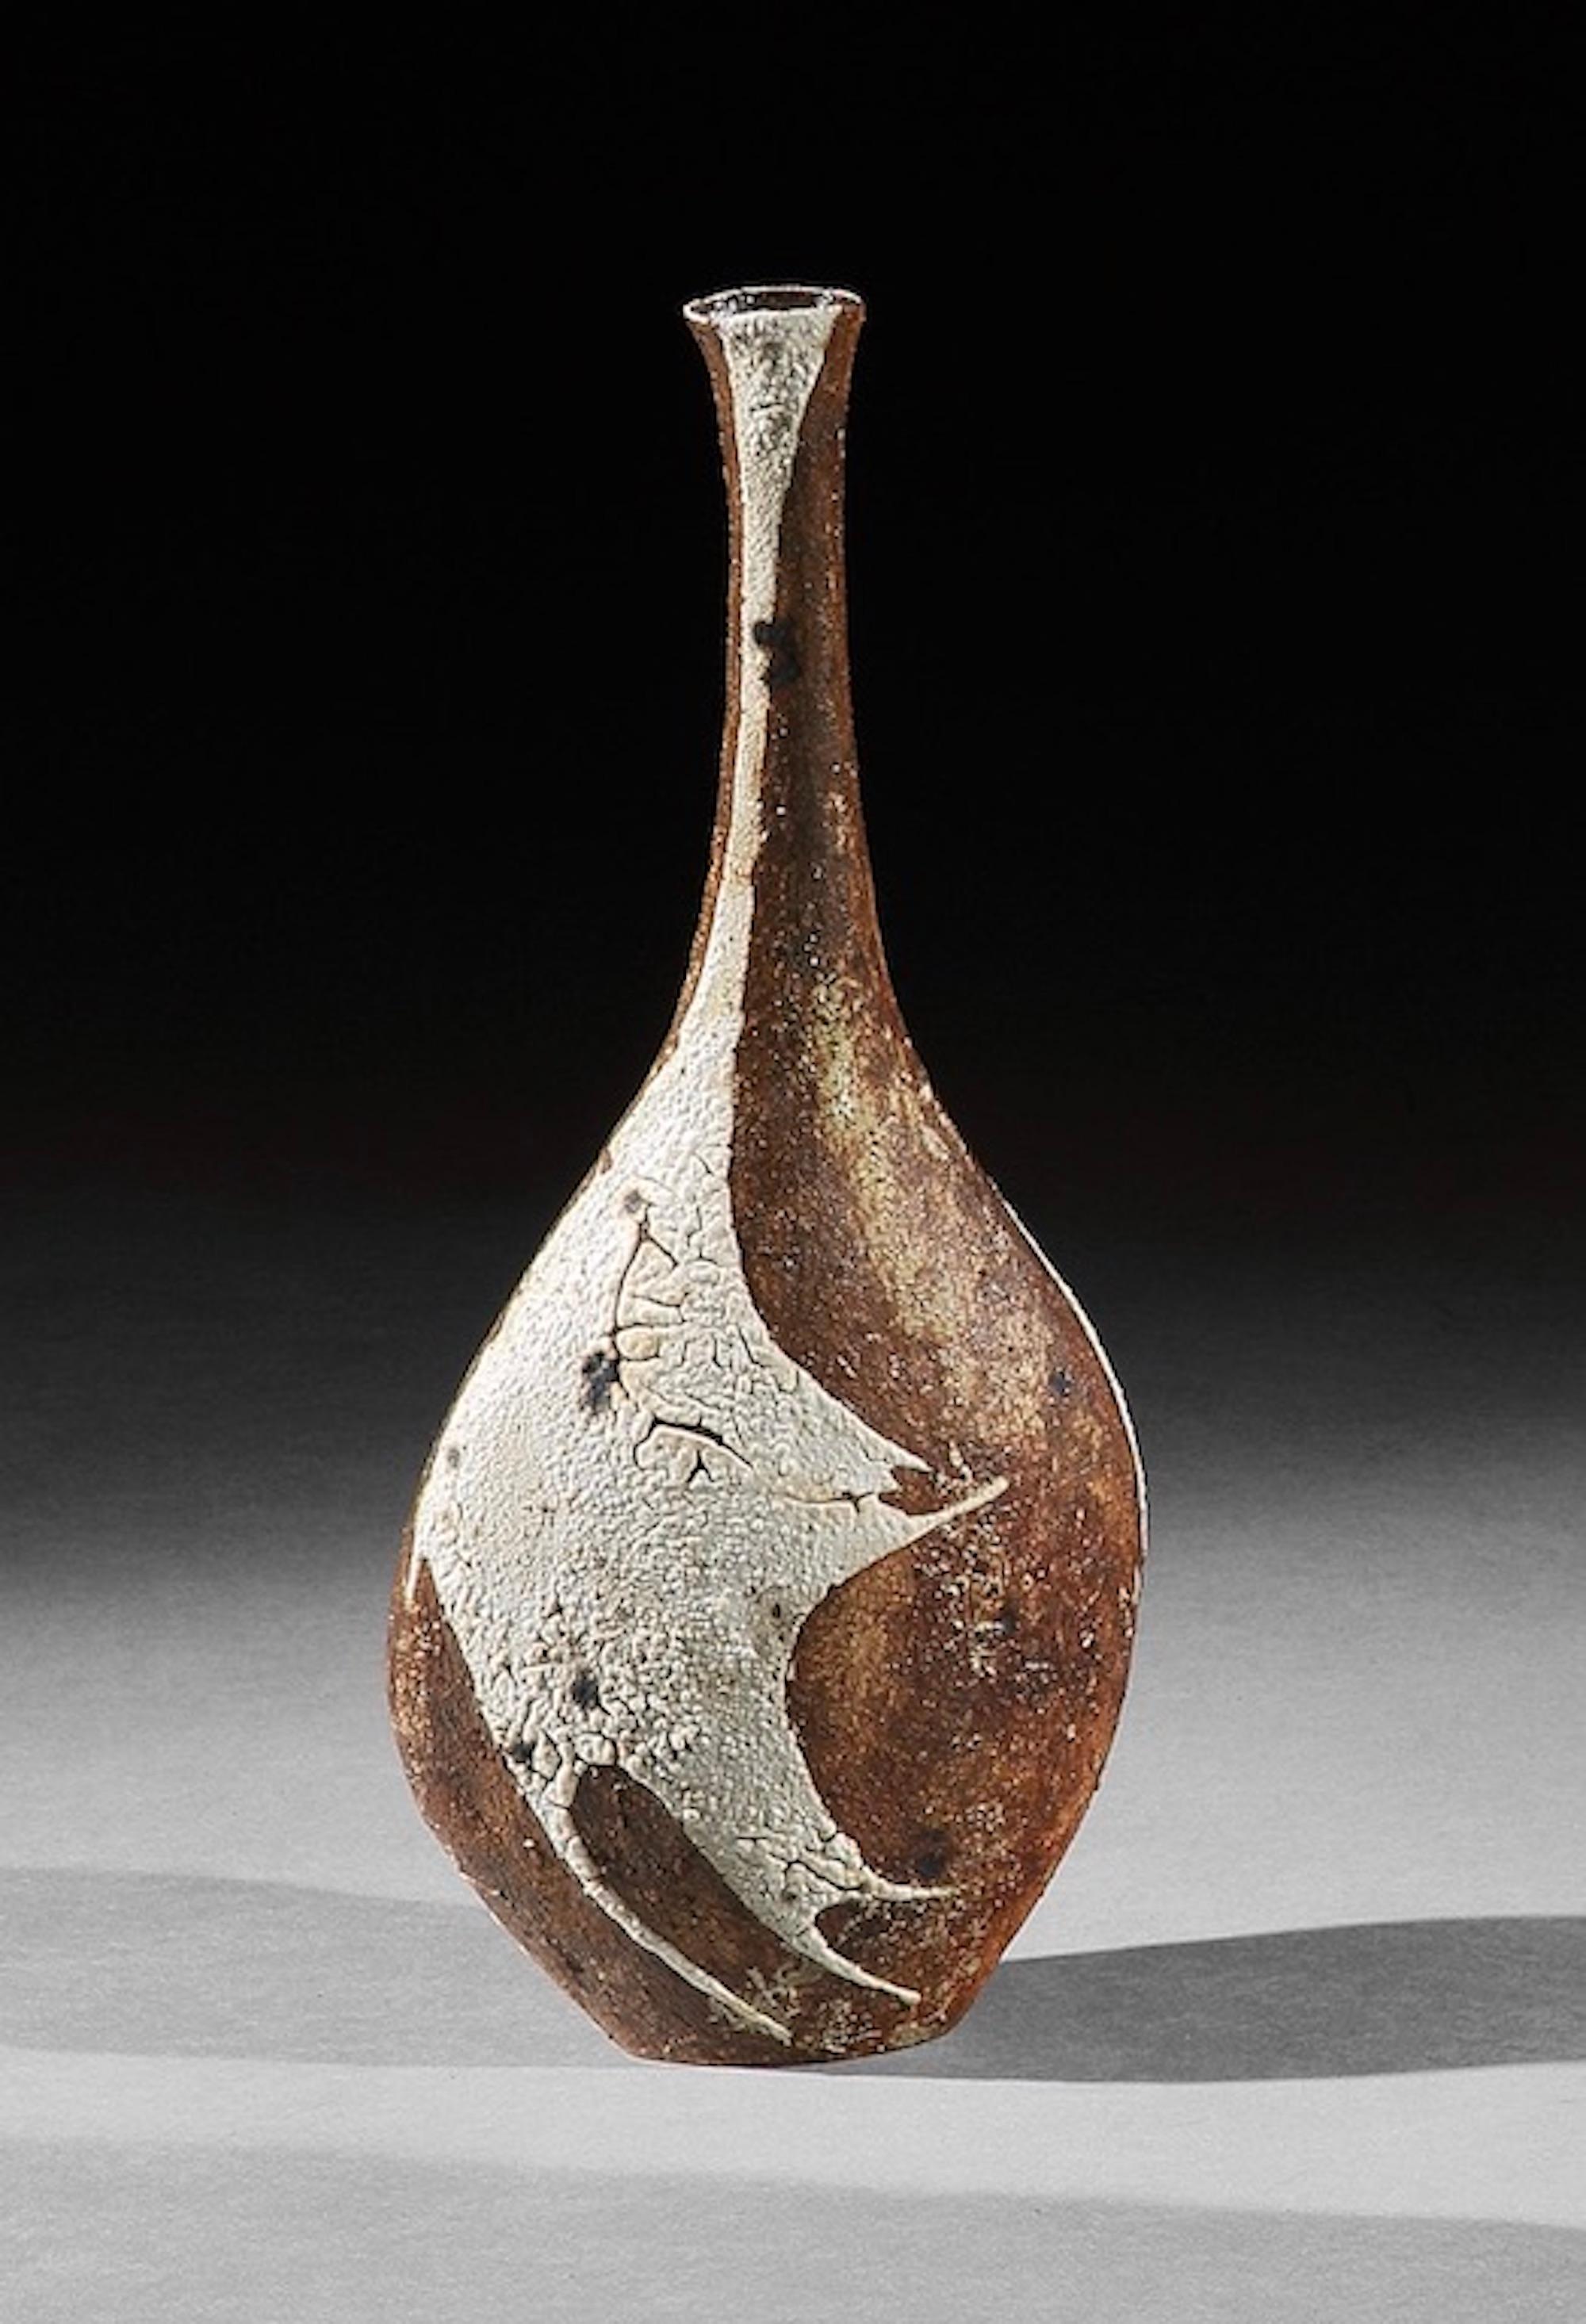 Robert Fournier (1915-2008), stoneware, tall flattened, bottle, circa 1960-1965
This bottle is from the same series as No.2008.658.18 in the Metropolitan Museum New York

- This elegant bottle is characteristic of Robert Fournier’s signature